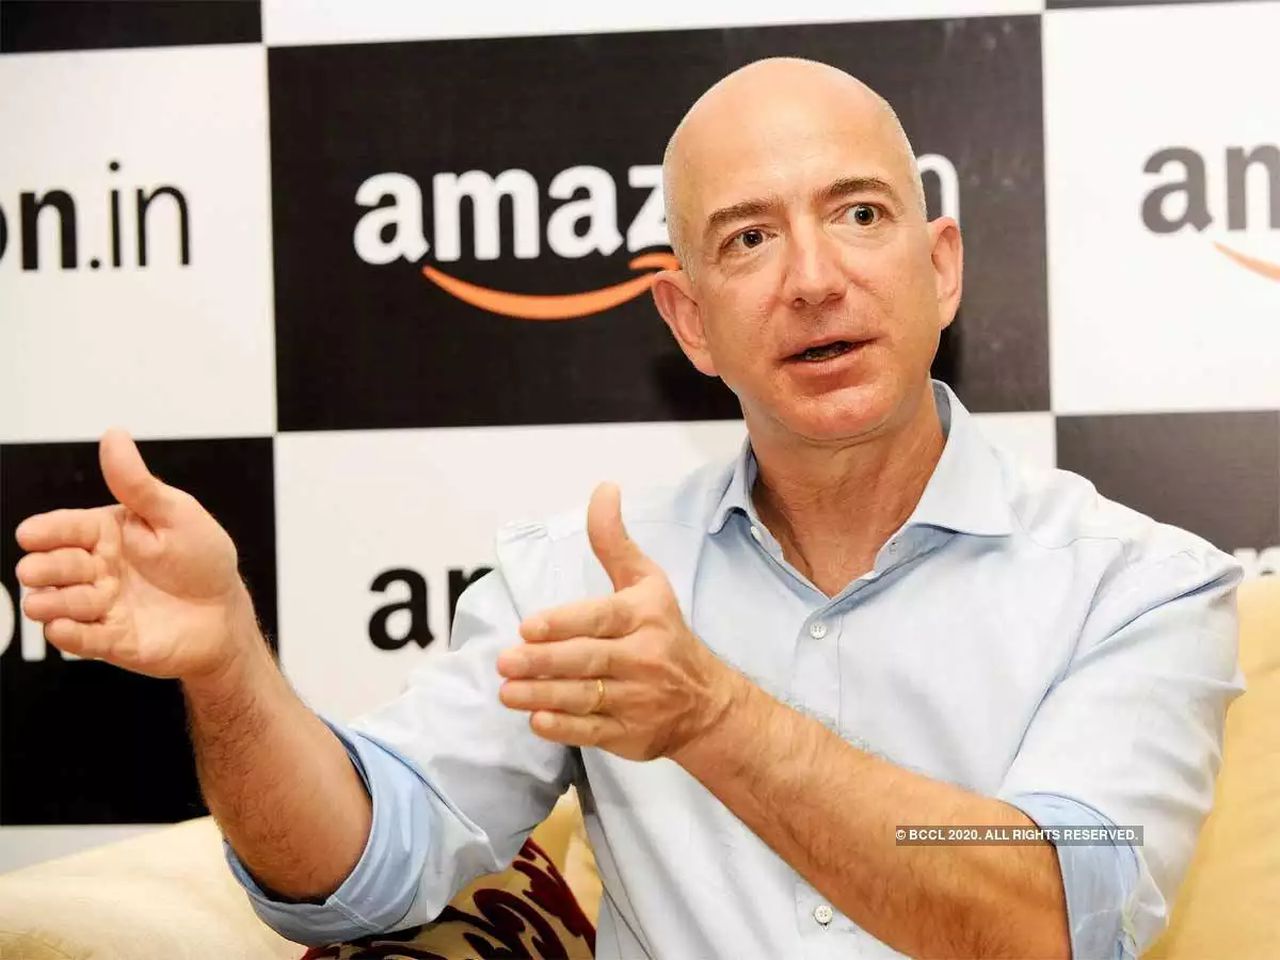 Founder of Amazon Jeff Bezos' visit to India to be protested by trader organization. Image via BCCL.